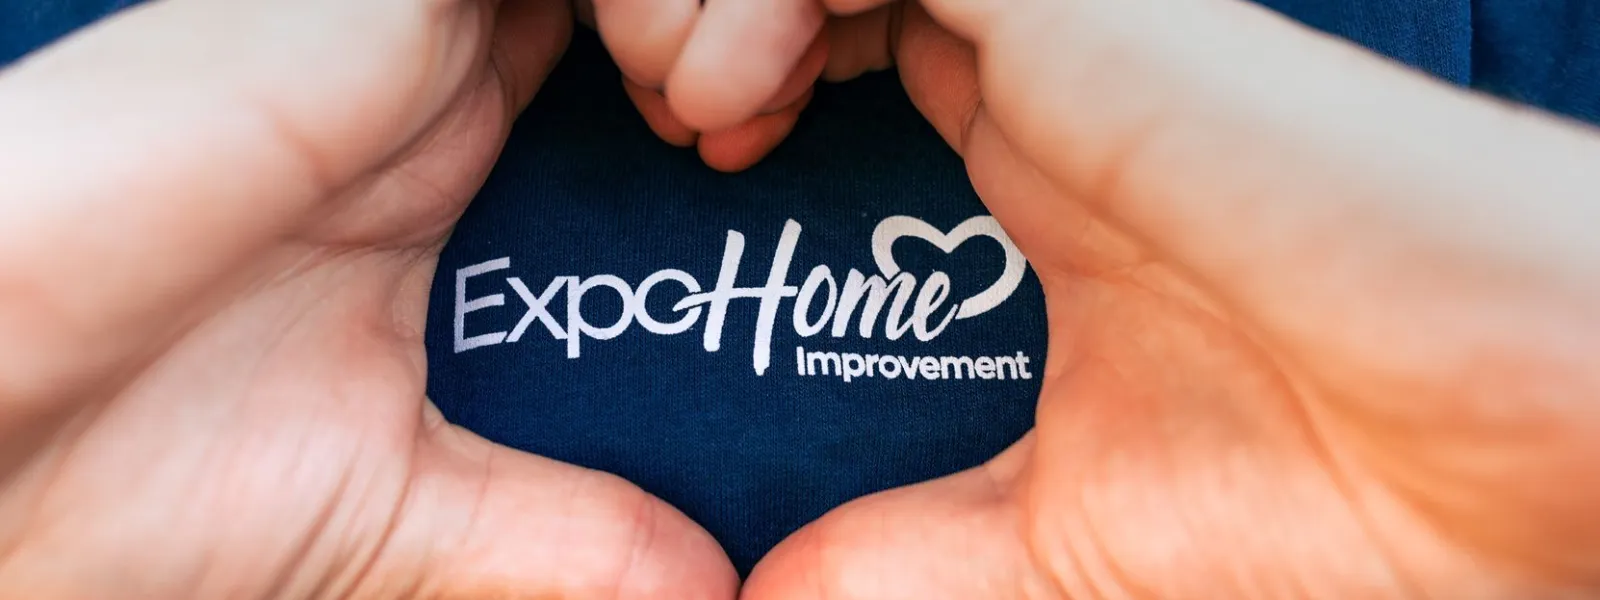 Expo Home Improvement named in Dallas 100!